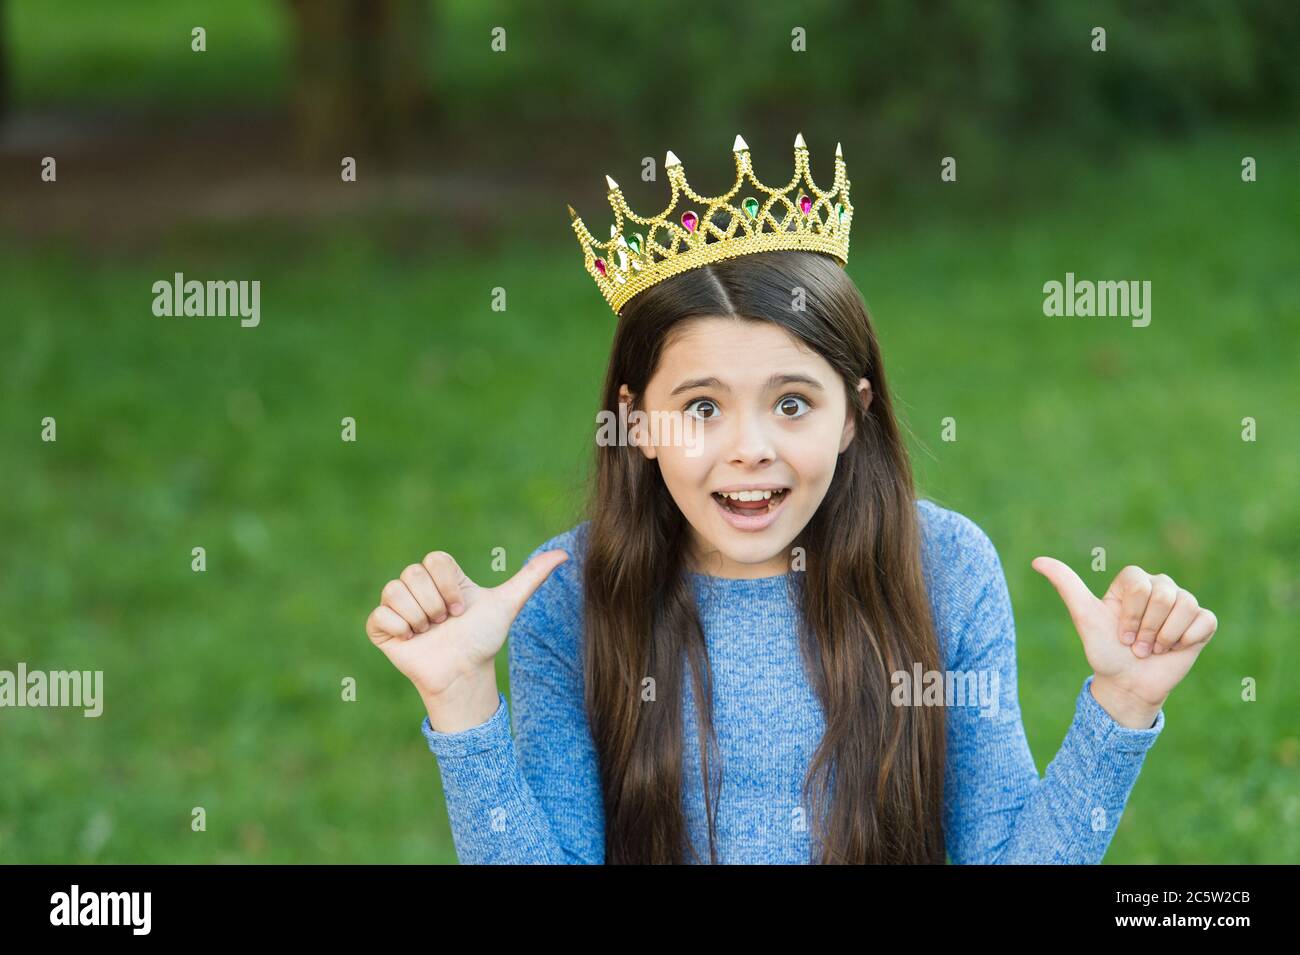 My beauty deserves crown. Emotional child give thumbs ups. Little miss wear crown. Beauty pageant. Party crown. Fashion accessory. Luxury diadem or tiara. Big boss. Hair salon. Always wear your crown. Stock Photo